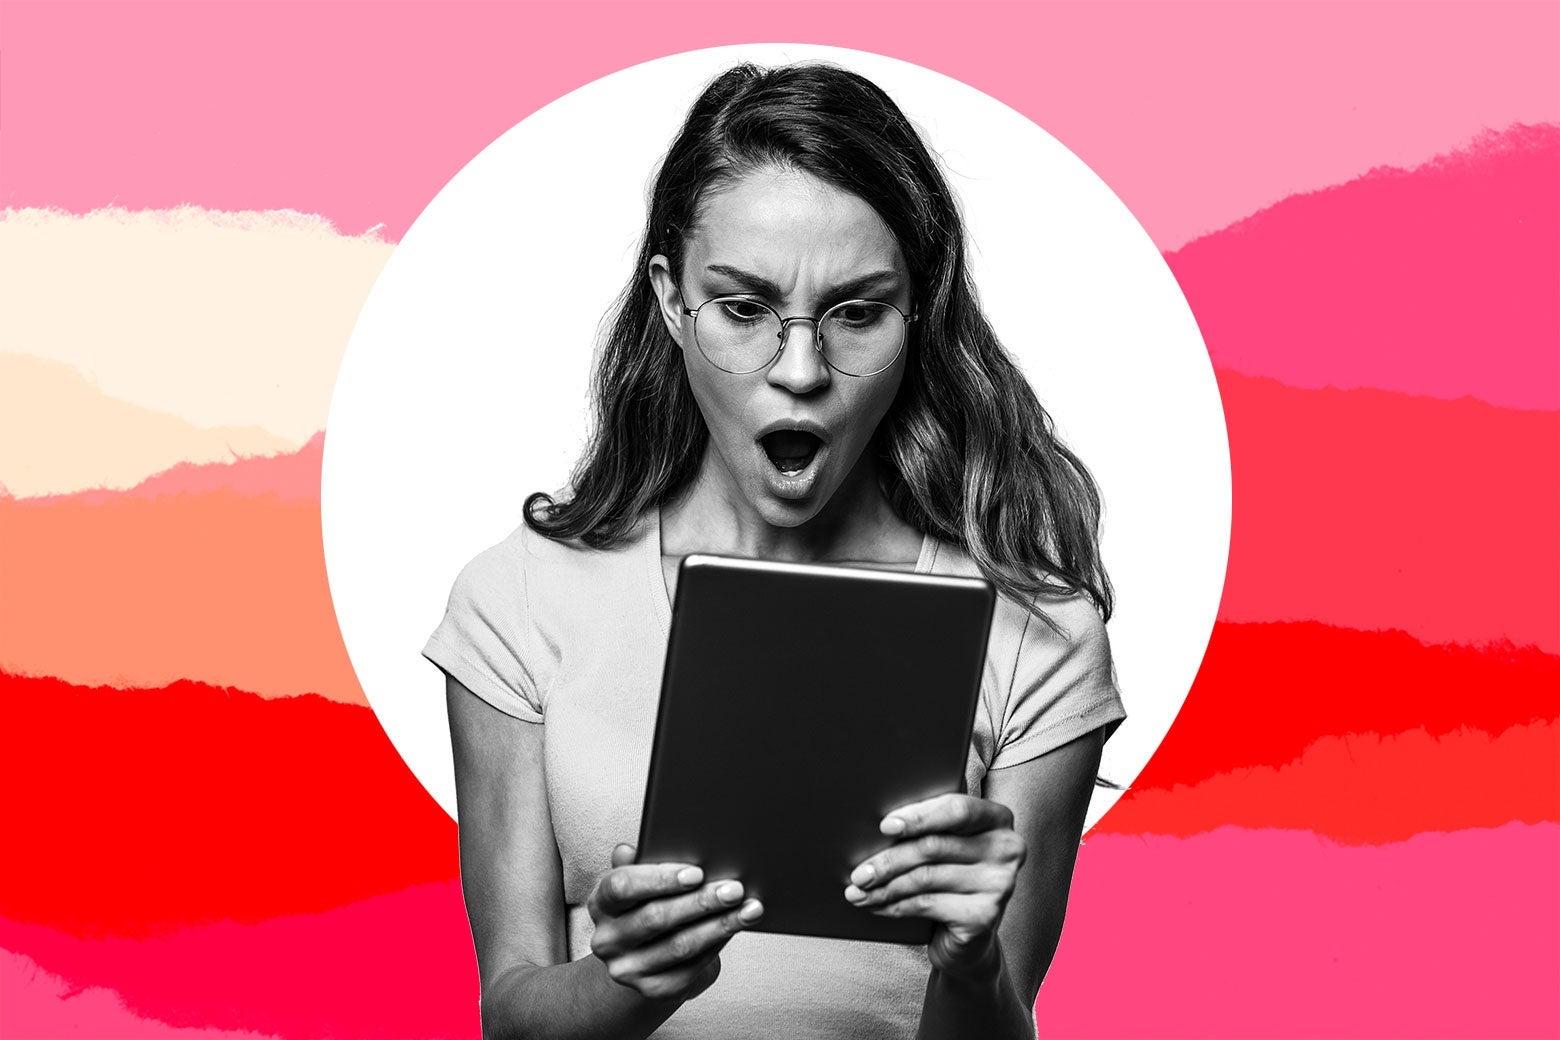 Woman with mouth agape looks shocked at what she's seeing on an iPad.